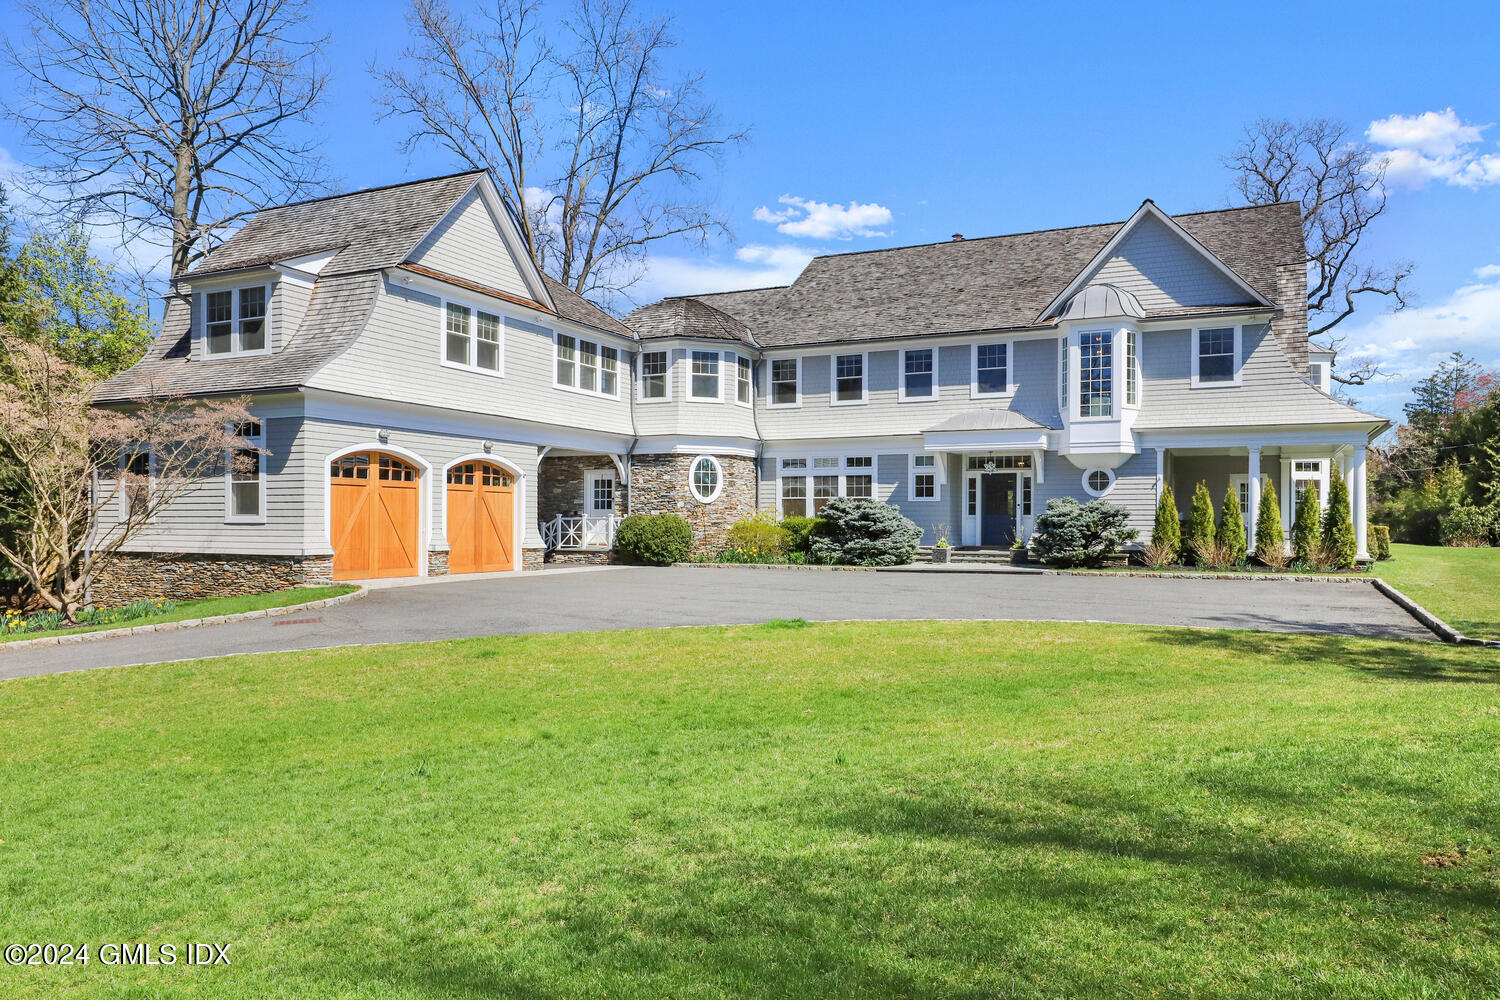 80 Meadow Wood Drive Dr, Greenwich, Connecticut - 6 Bedrooms  
7.5 Bathrooms - 